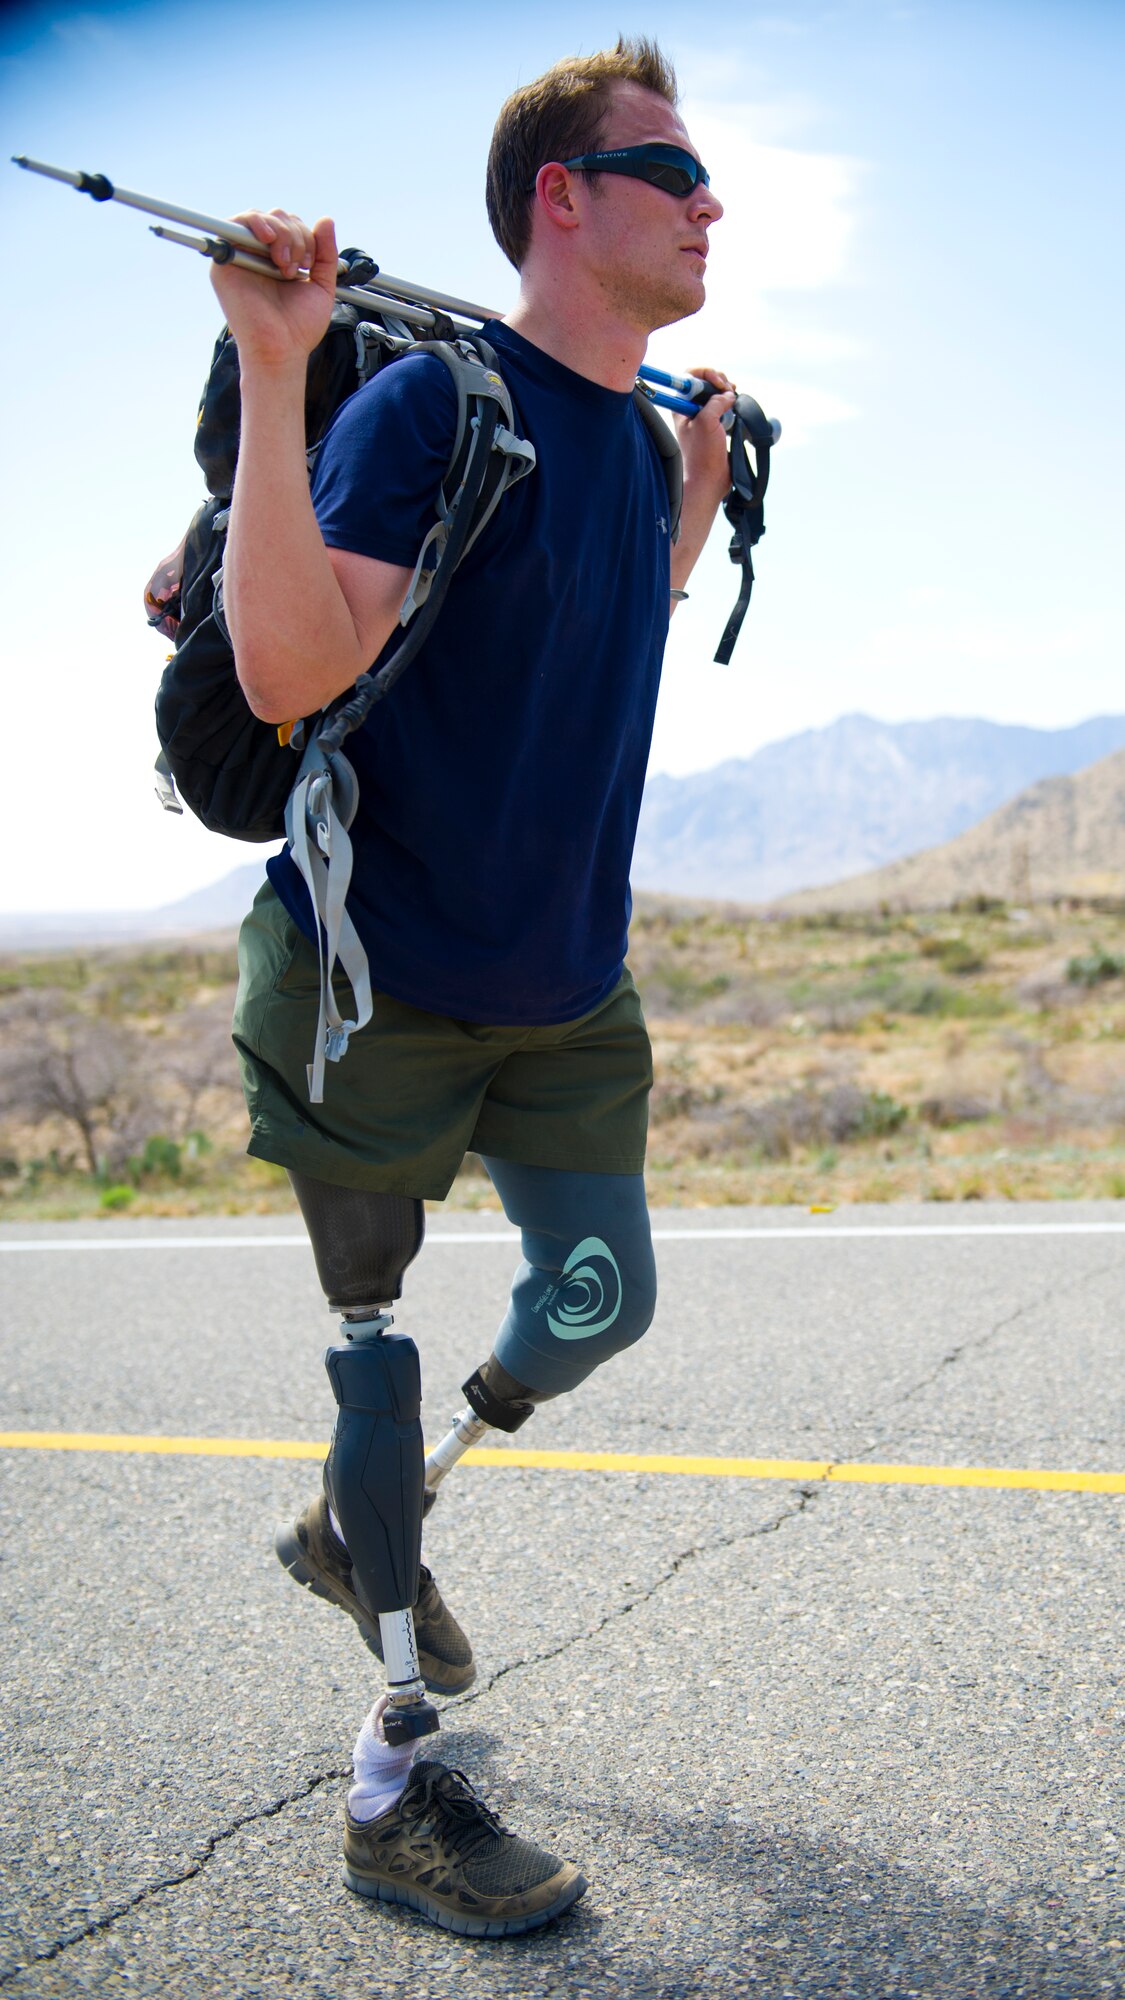 WHITE SANDS MISSILE RANGE, N.M. – A double-amputee and wounded warrior participant in the Bataan Memorial Death March continues along the course here March 25. Several wounded warriors who were missing one or more limbs completed the full marathon in honor of those who endured the 80-mile Bataan Death March in 1942. (U.S. Air Force photo by Airman 1st Class Daniel E. Liddicoet/Released)